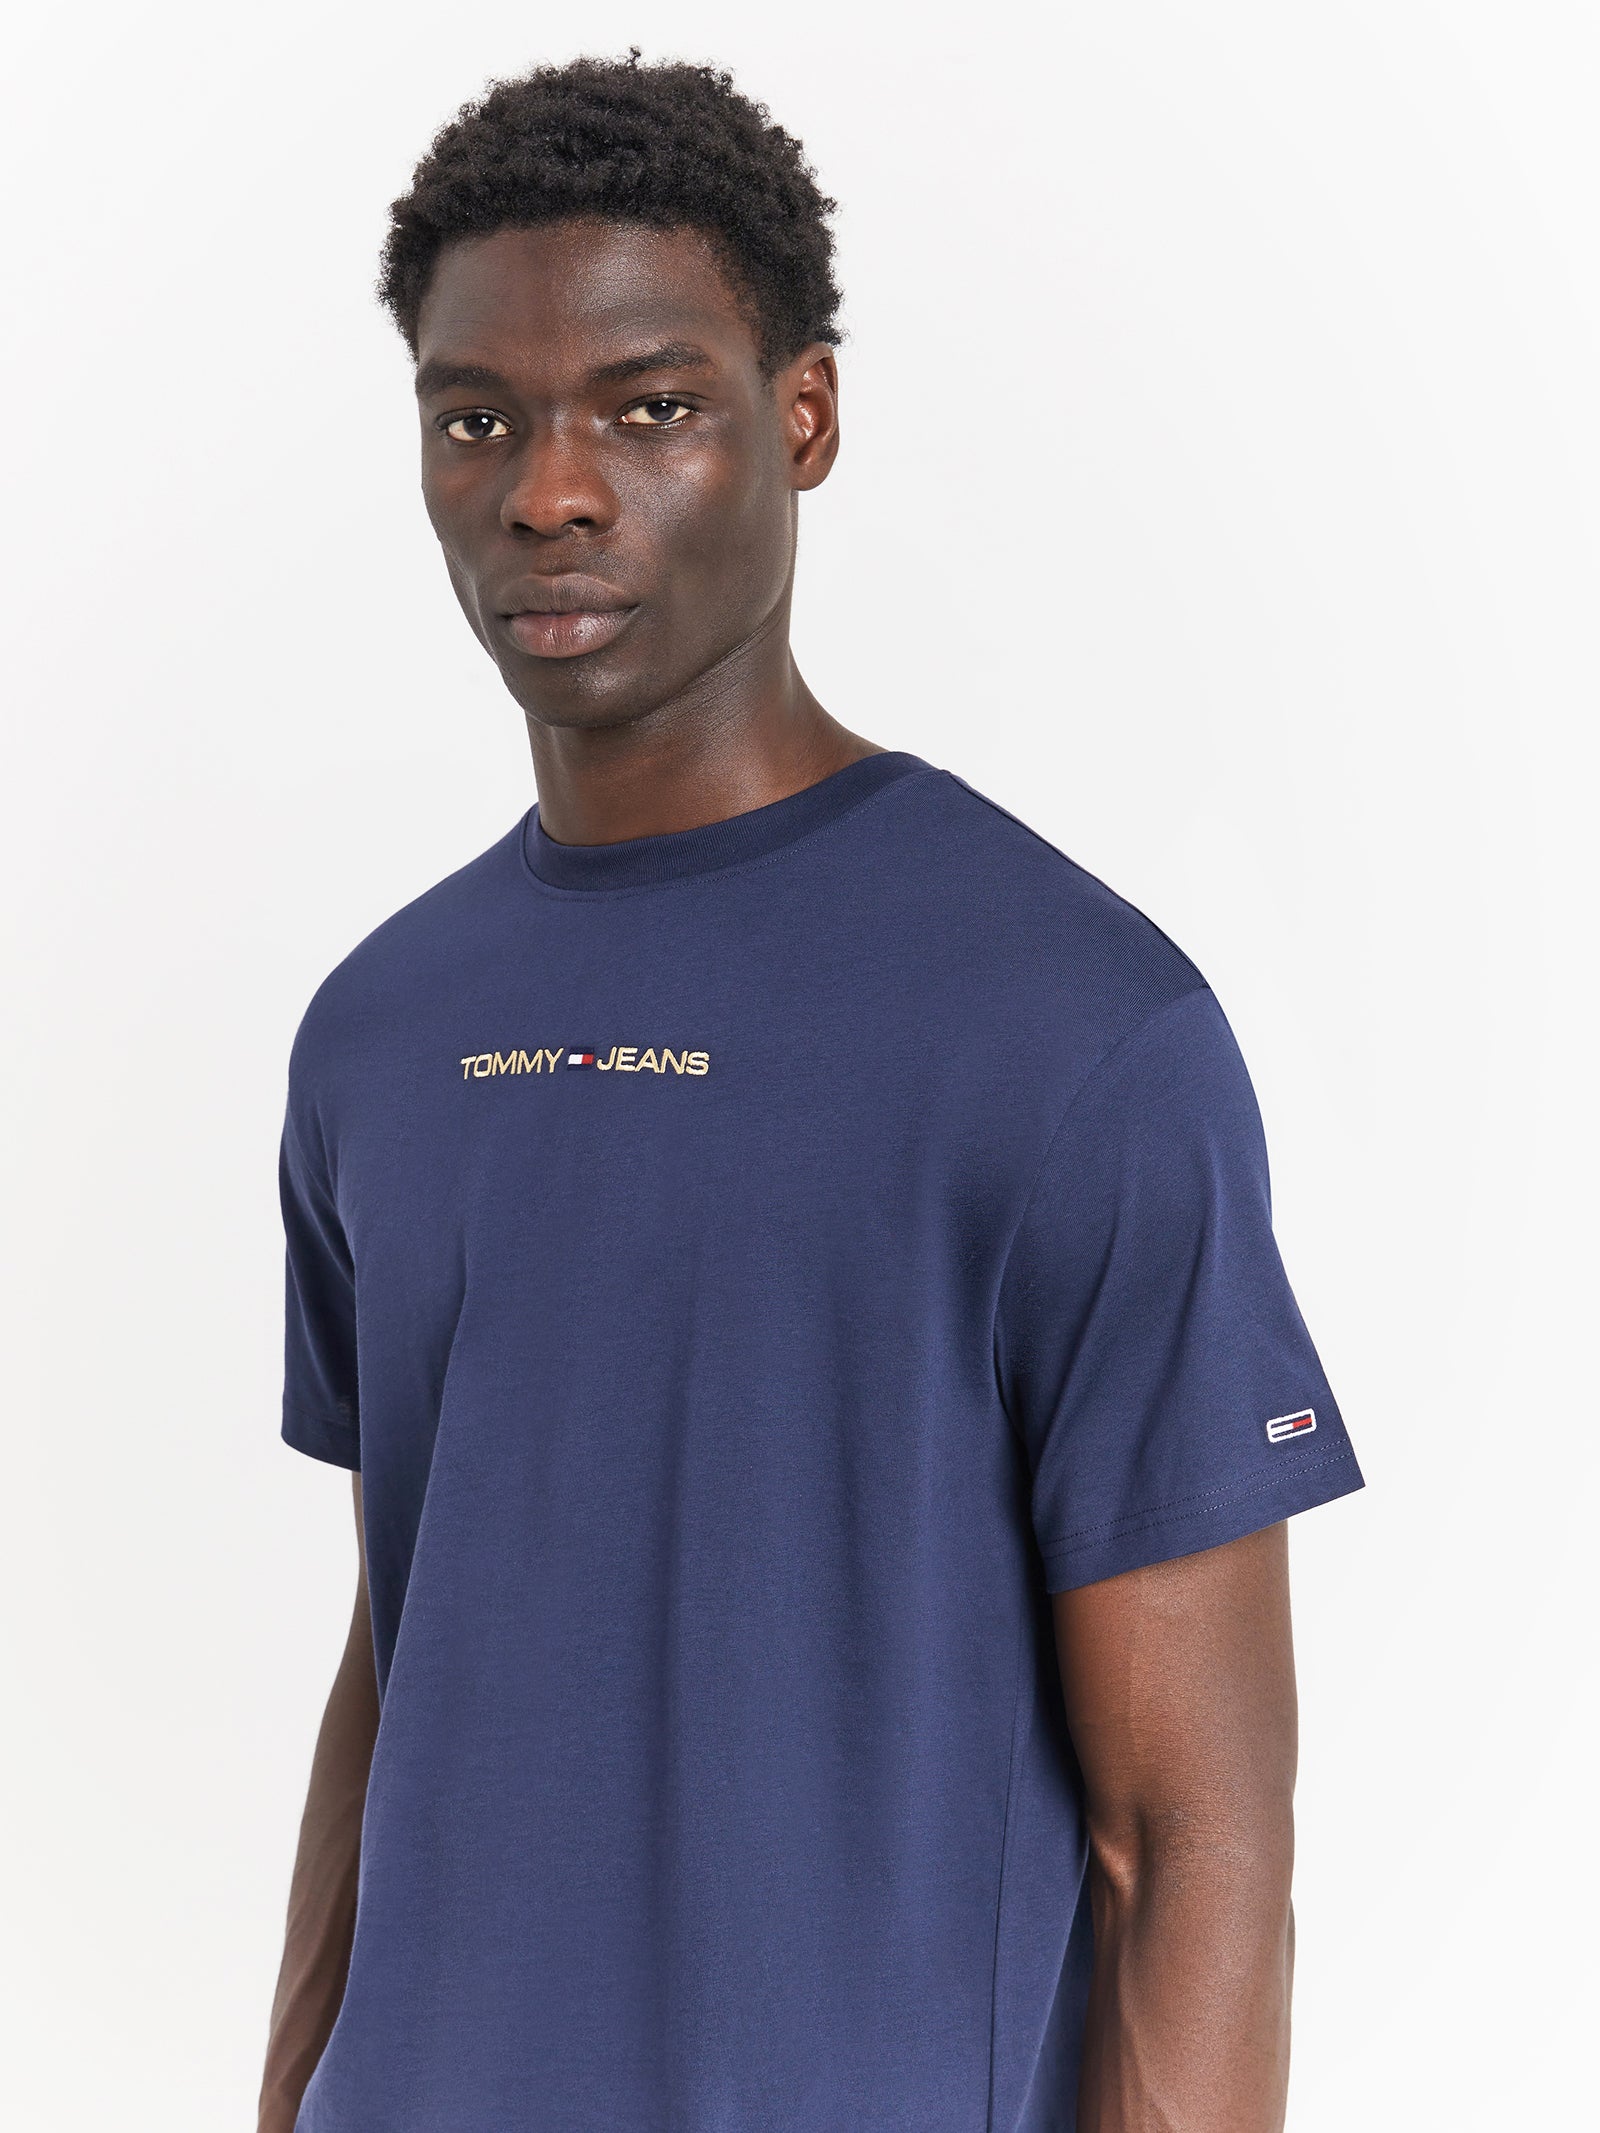 Classic Gold Linear T-Shirt in Twilight Navy